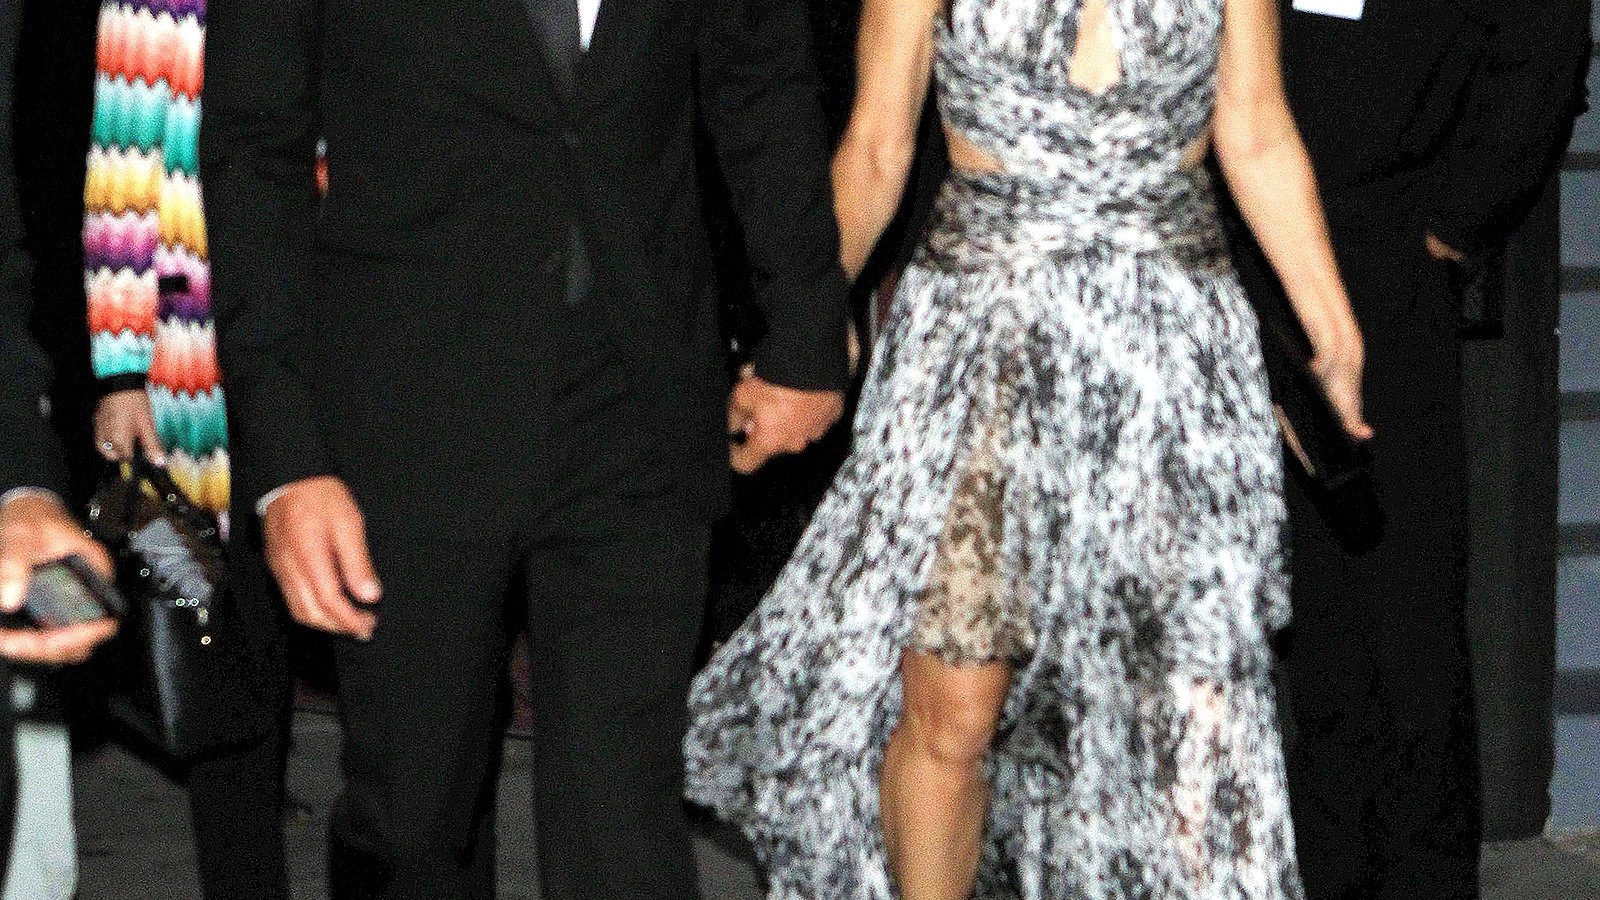 Bryan Randall and Sandra Bullock attend a movie premiere together